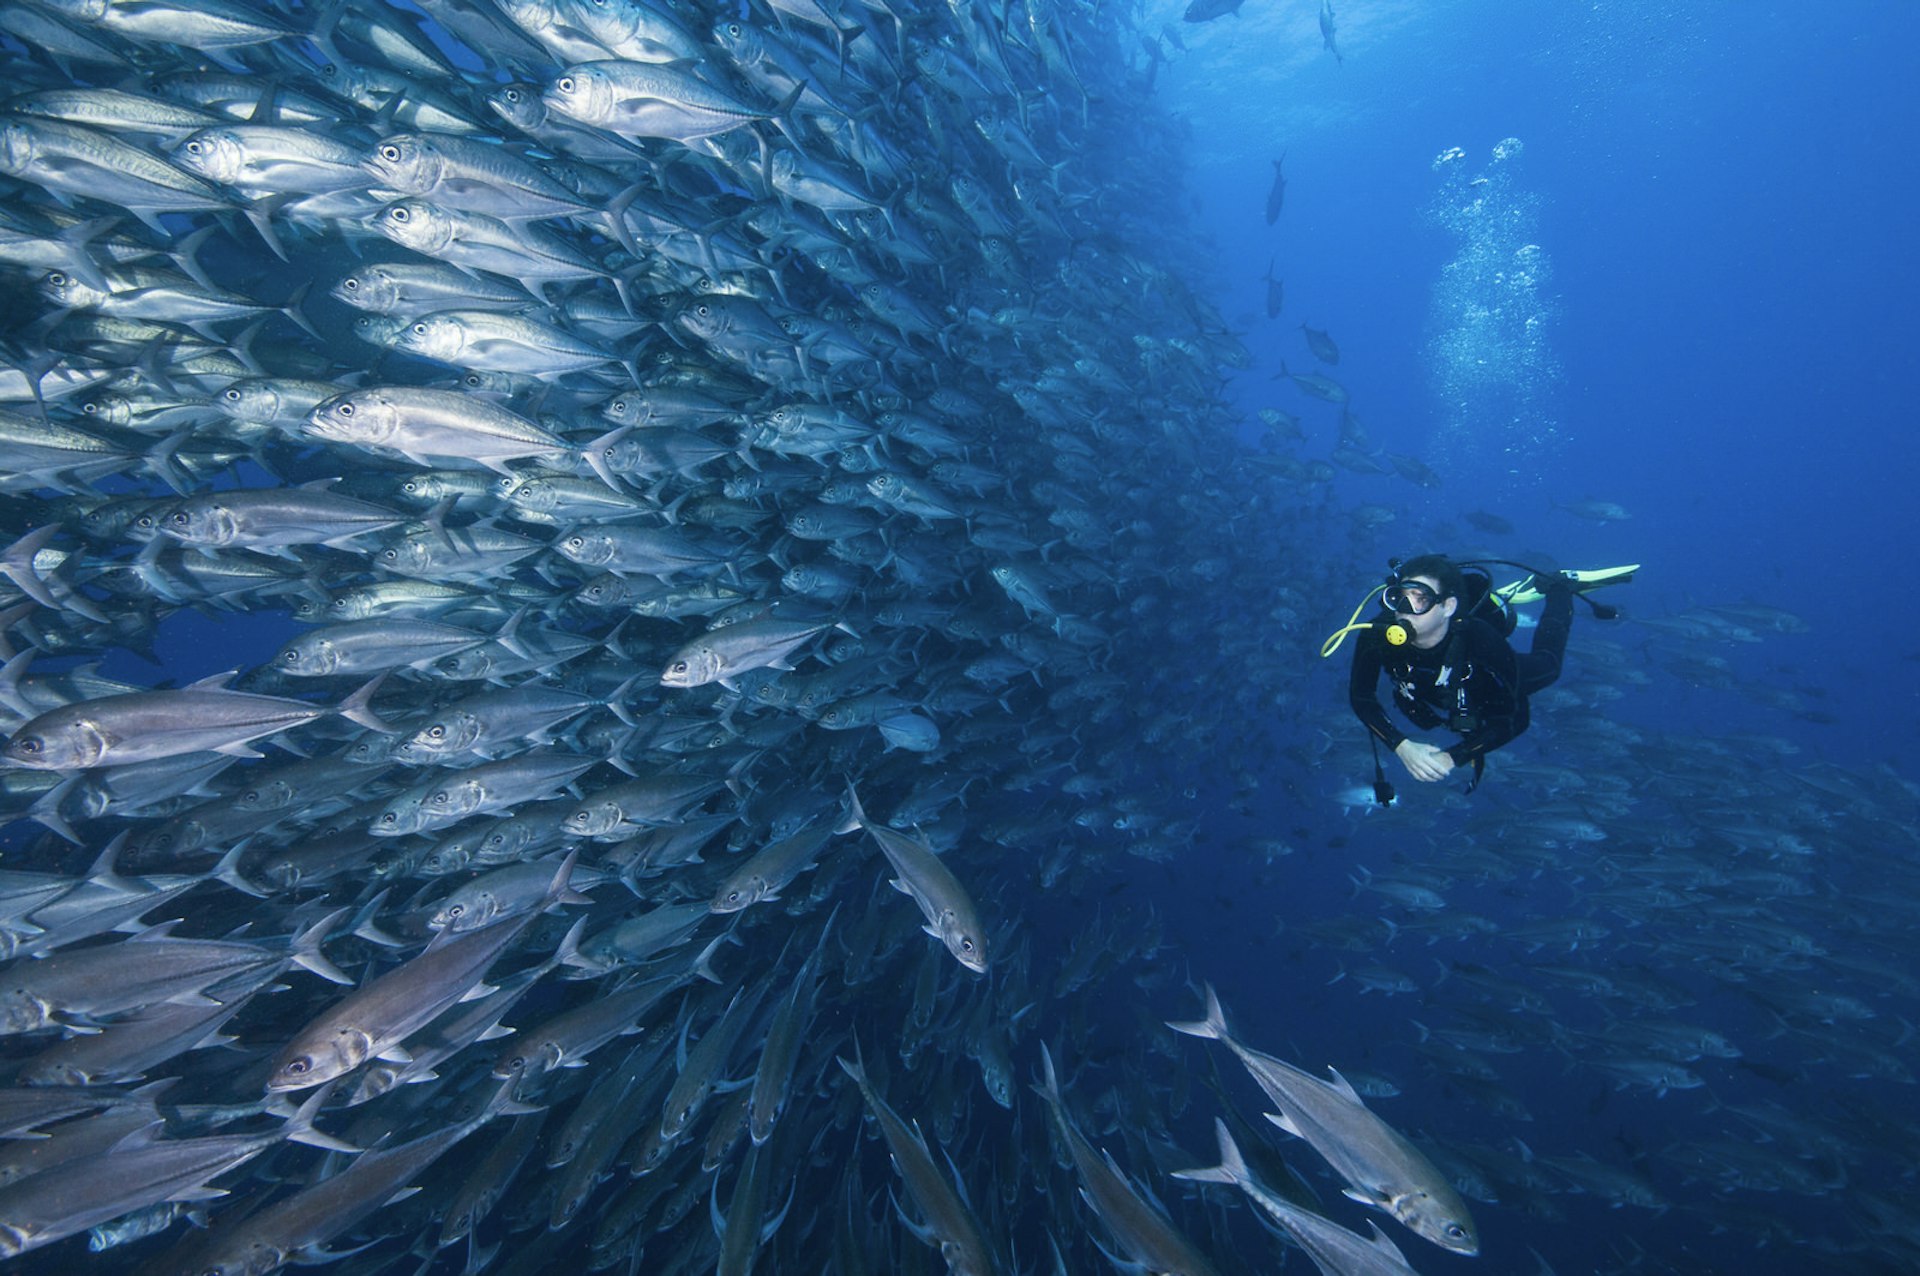 A diver swims near a large school of fish off the coast of Cocos Island, Costa Rica